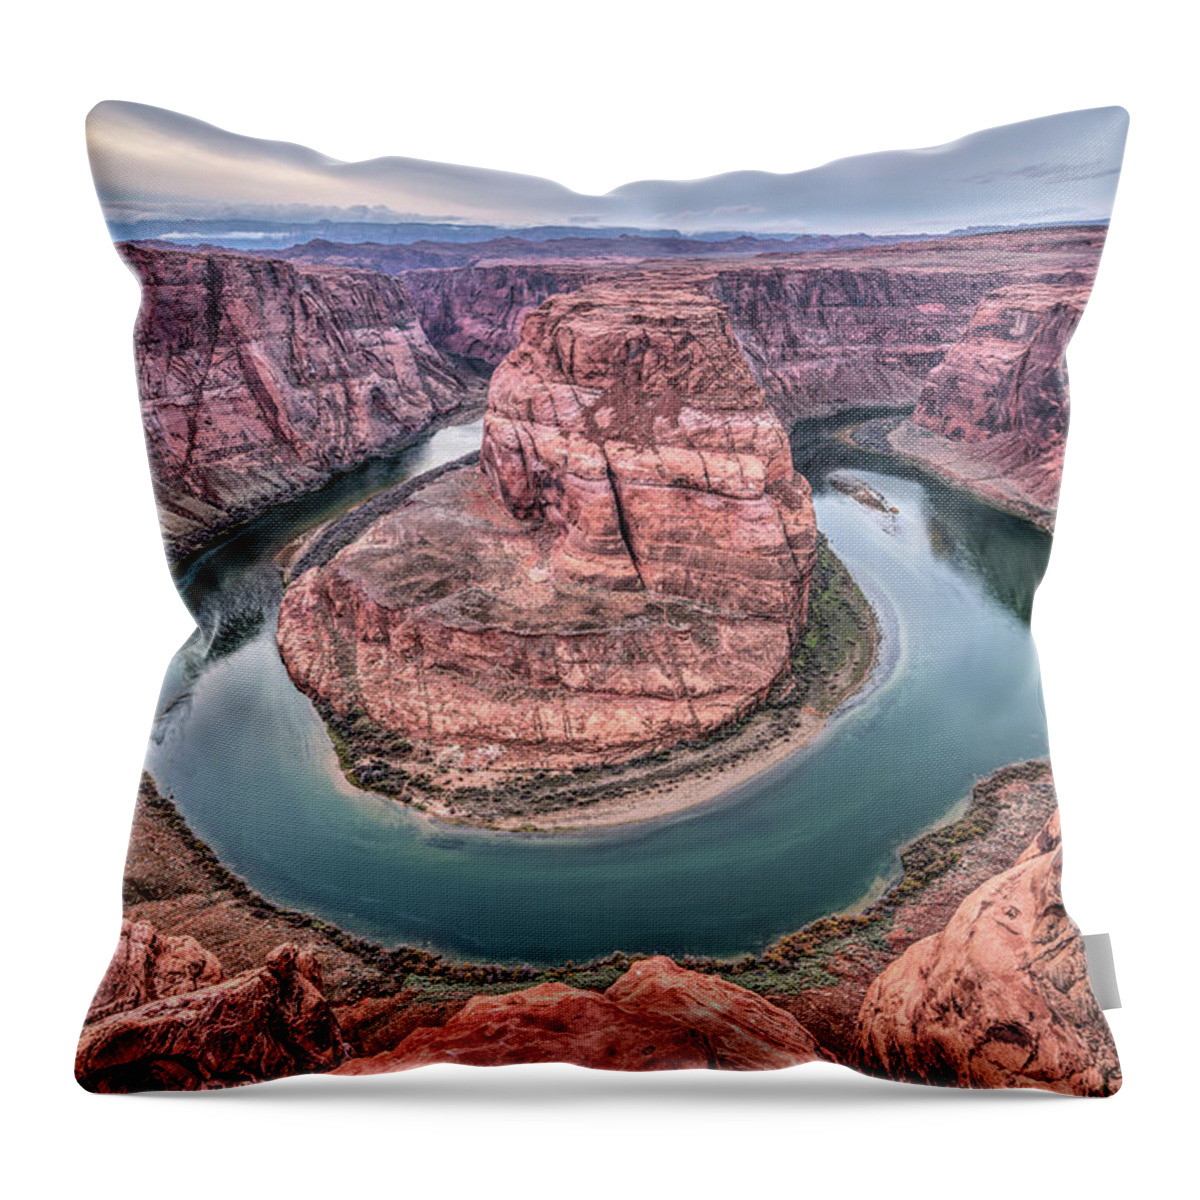 Horseshoe Bend Throw Pillow featuring the photograph Horseshoe Bend Arizona by Todd Aaron